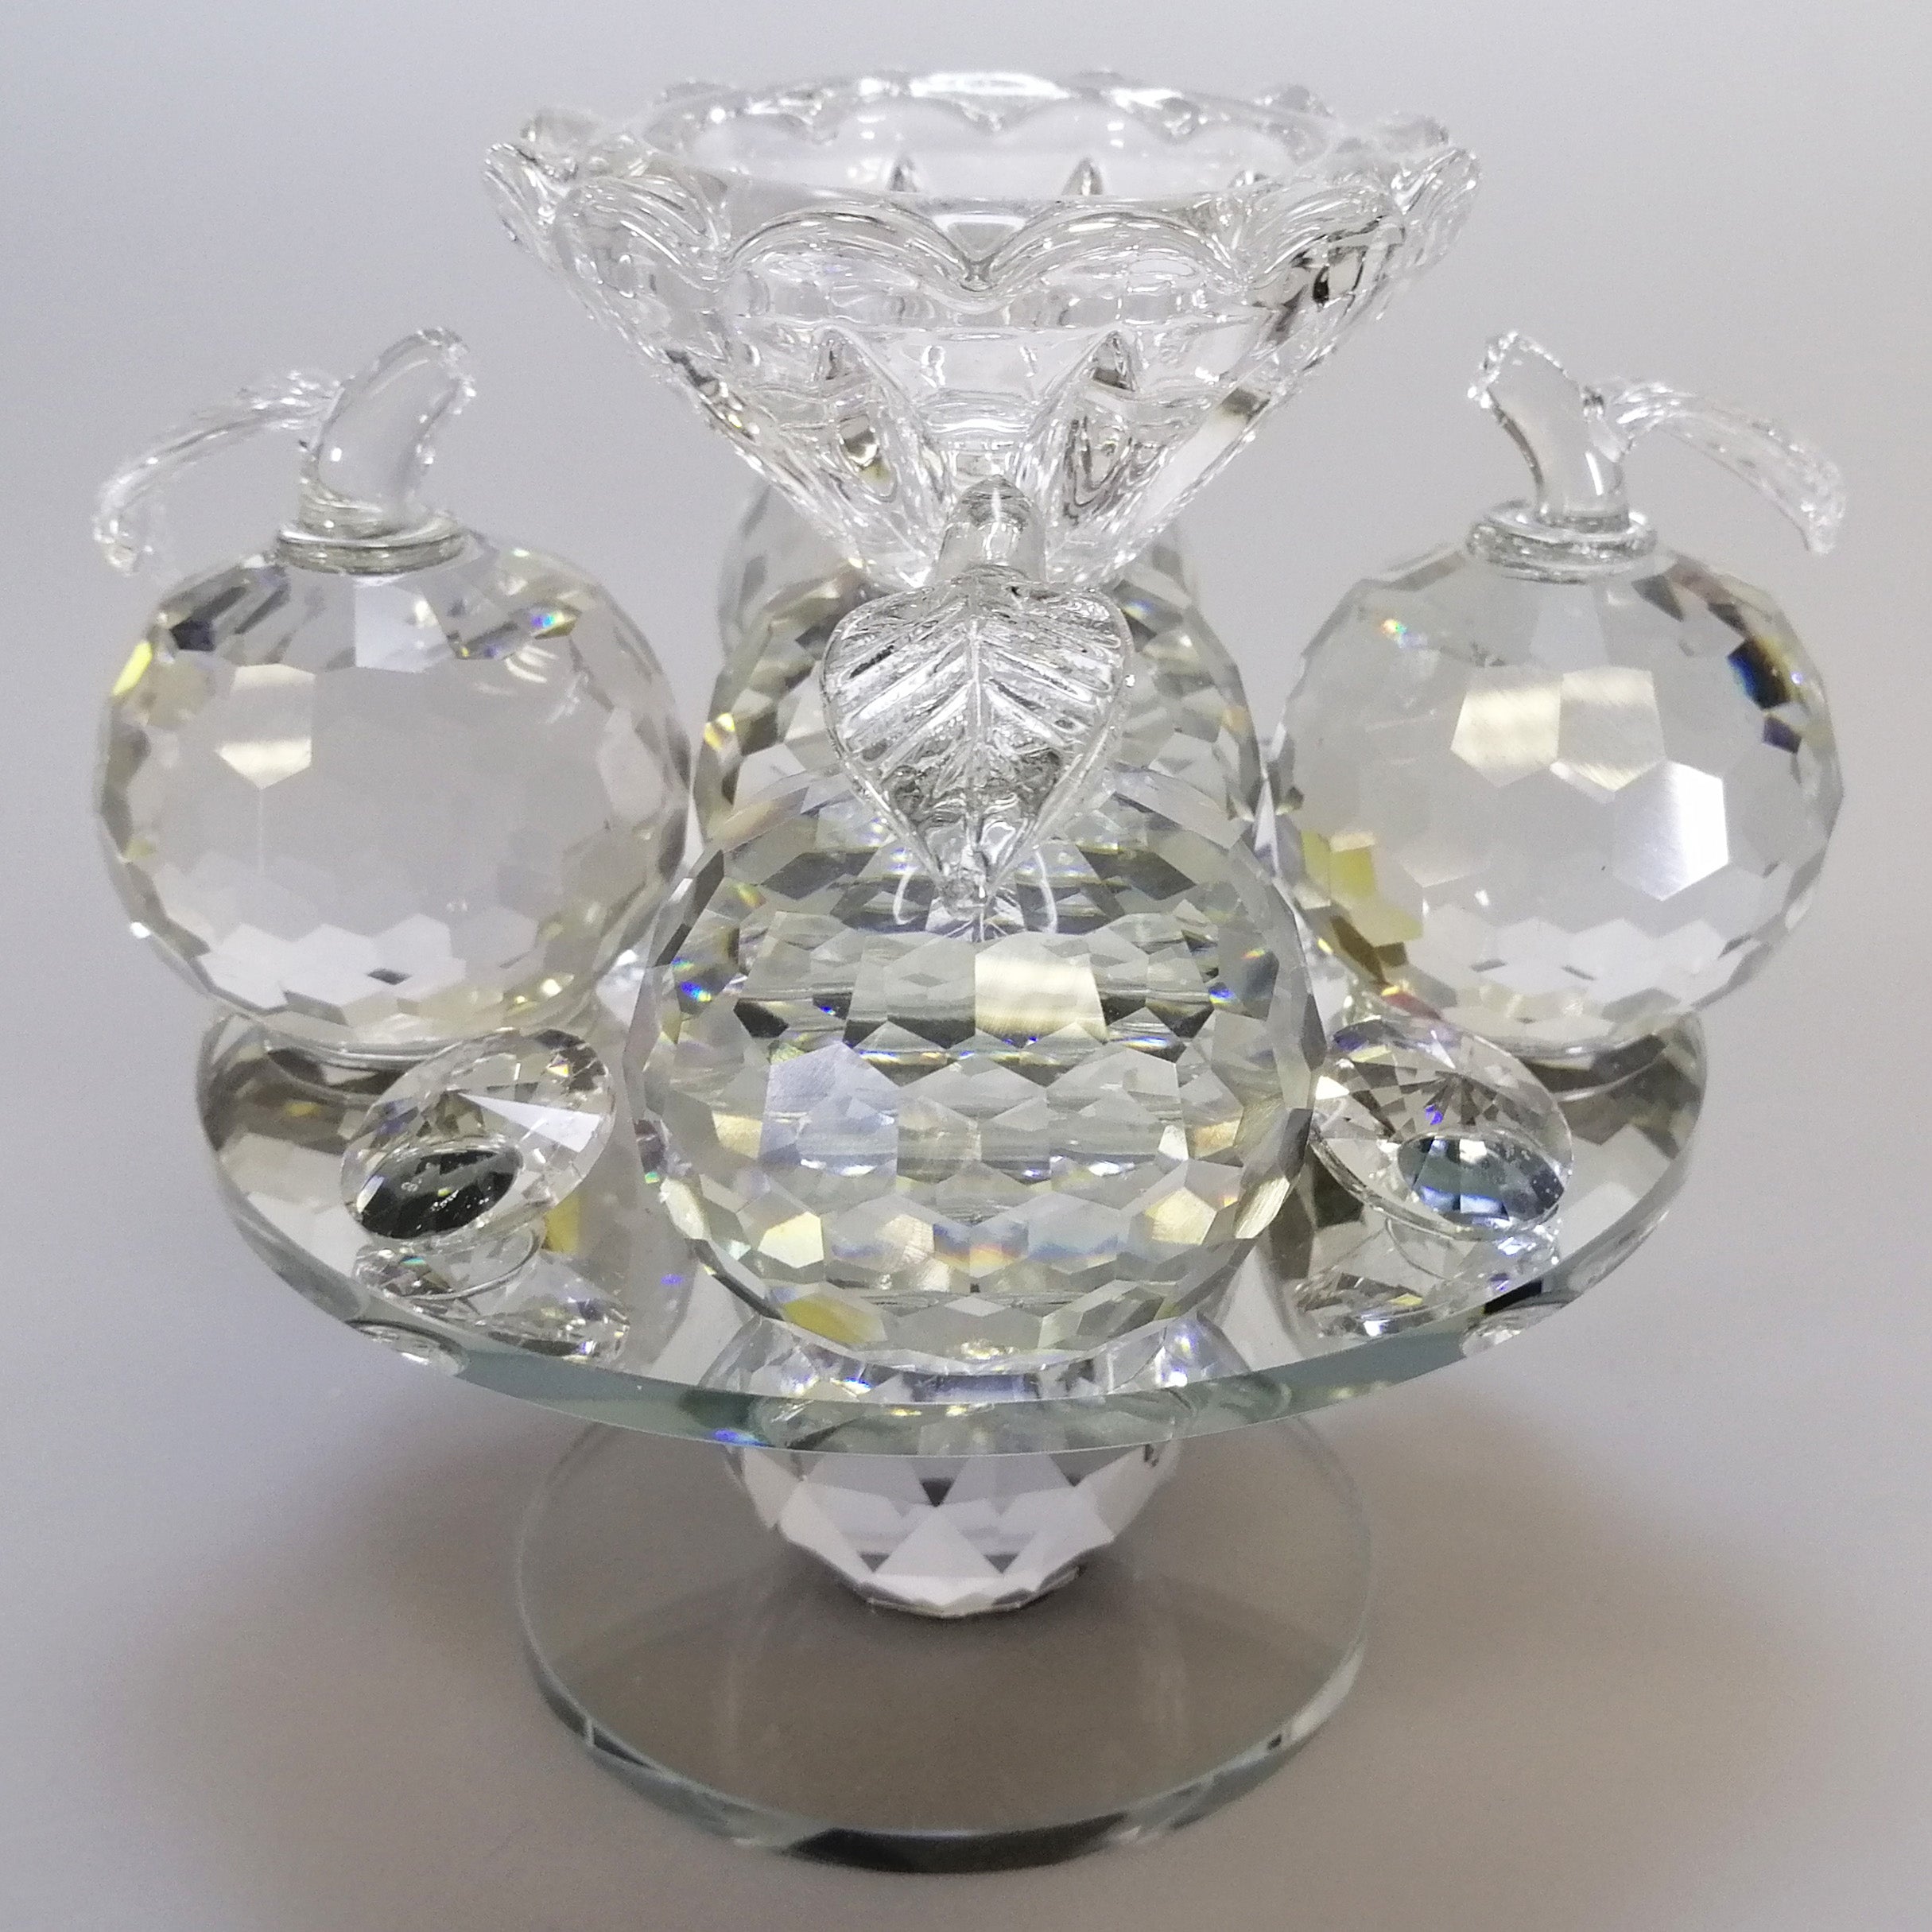 Clear Glass Apples Tealight Holder on Turnable Plate